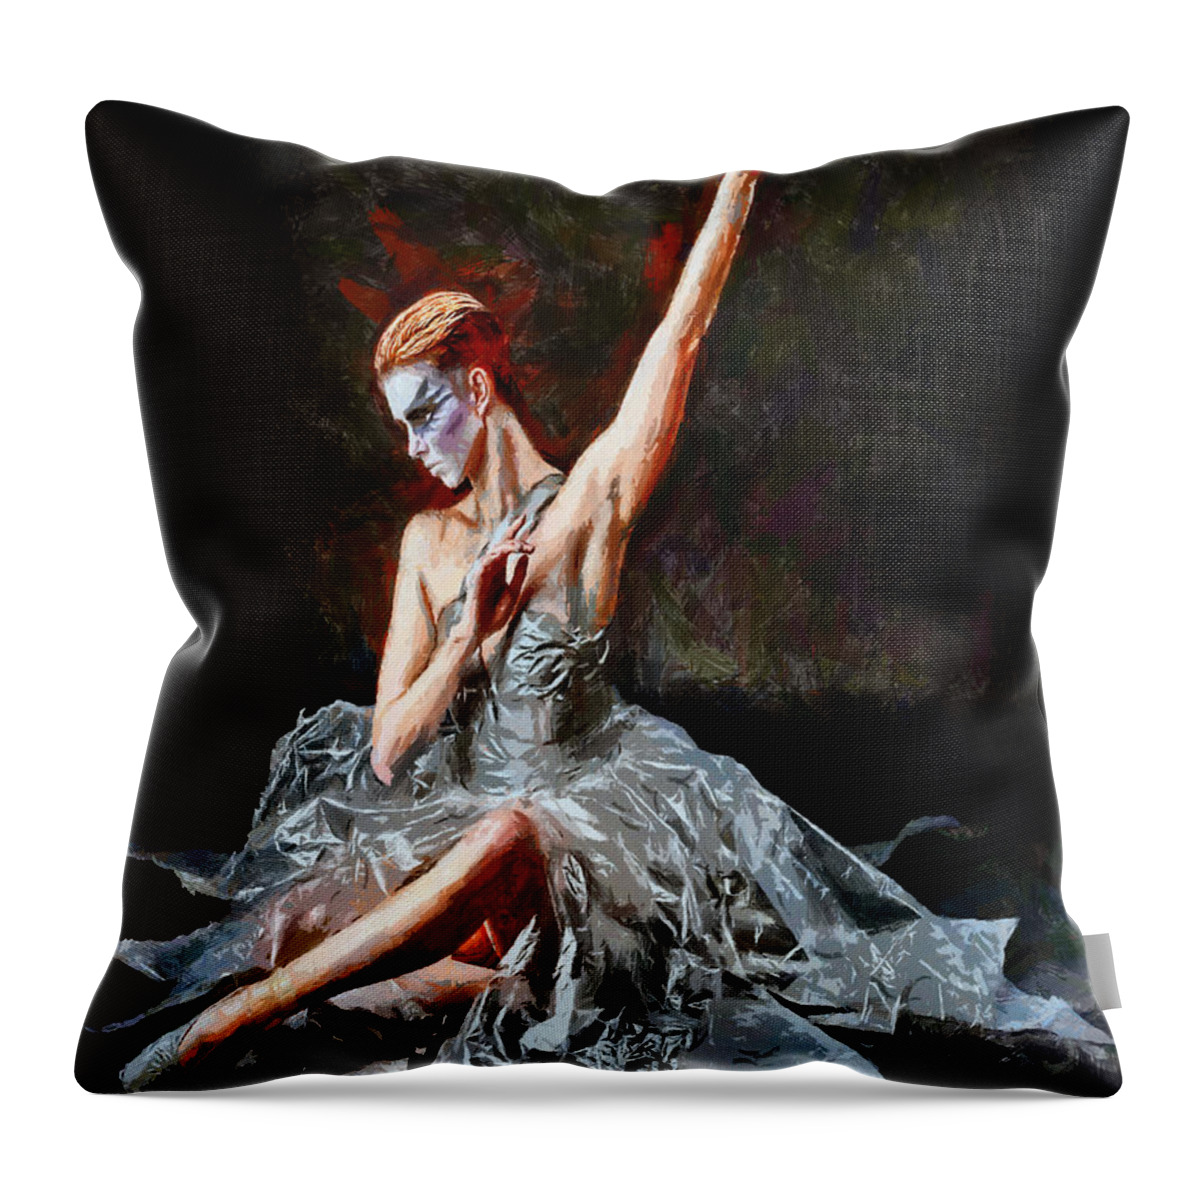 Dance Throw Pillow featuring the painting Danse Macabre by Tyler Robbins